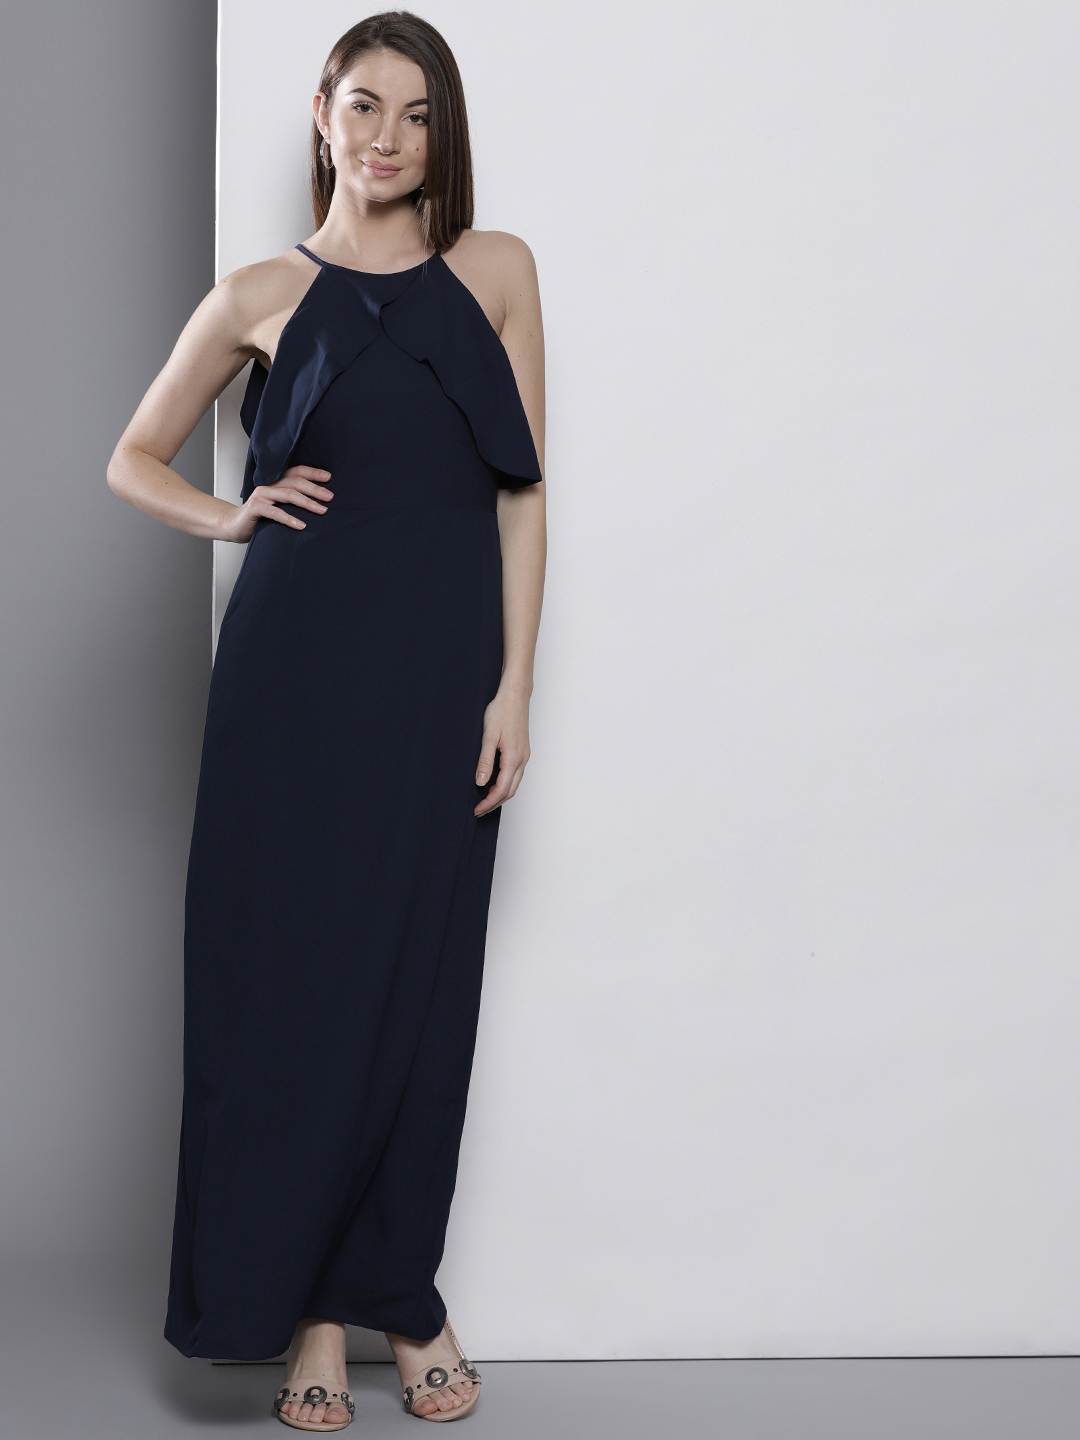 DOROTHY PERKINS Women Navy Solid Maxi Dress Price in India